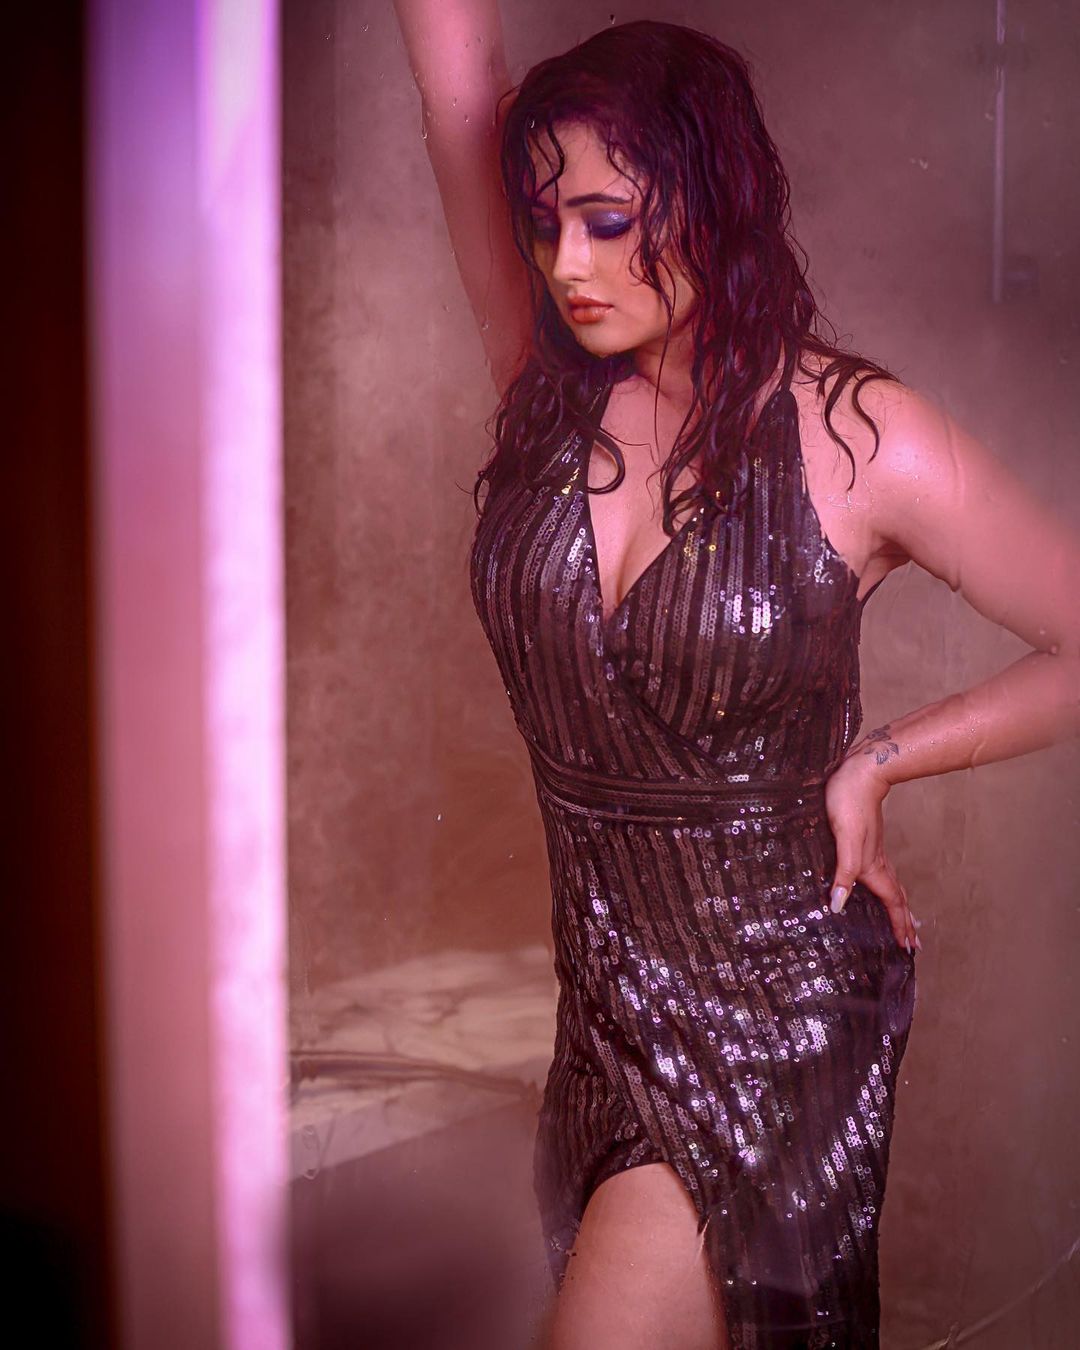 Rashami Desai is flaunting her curves in the shimmering dress.